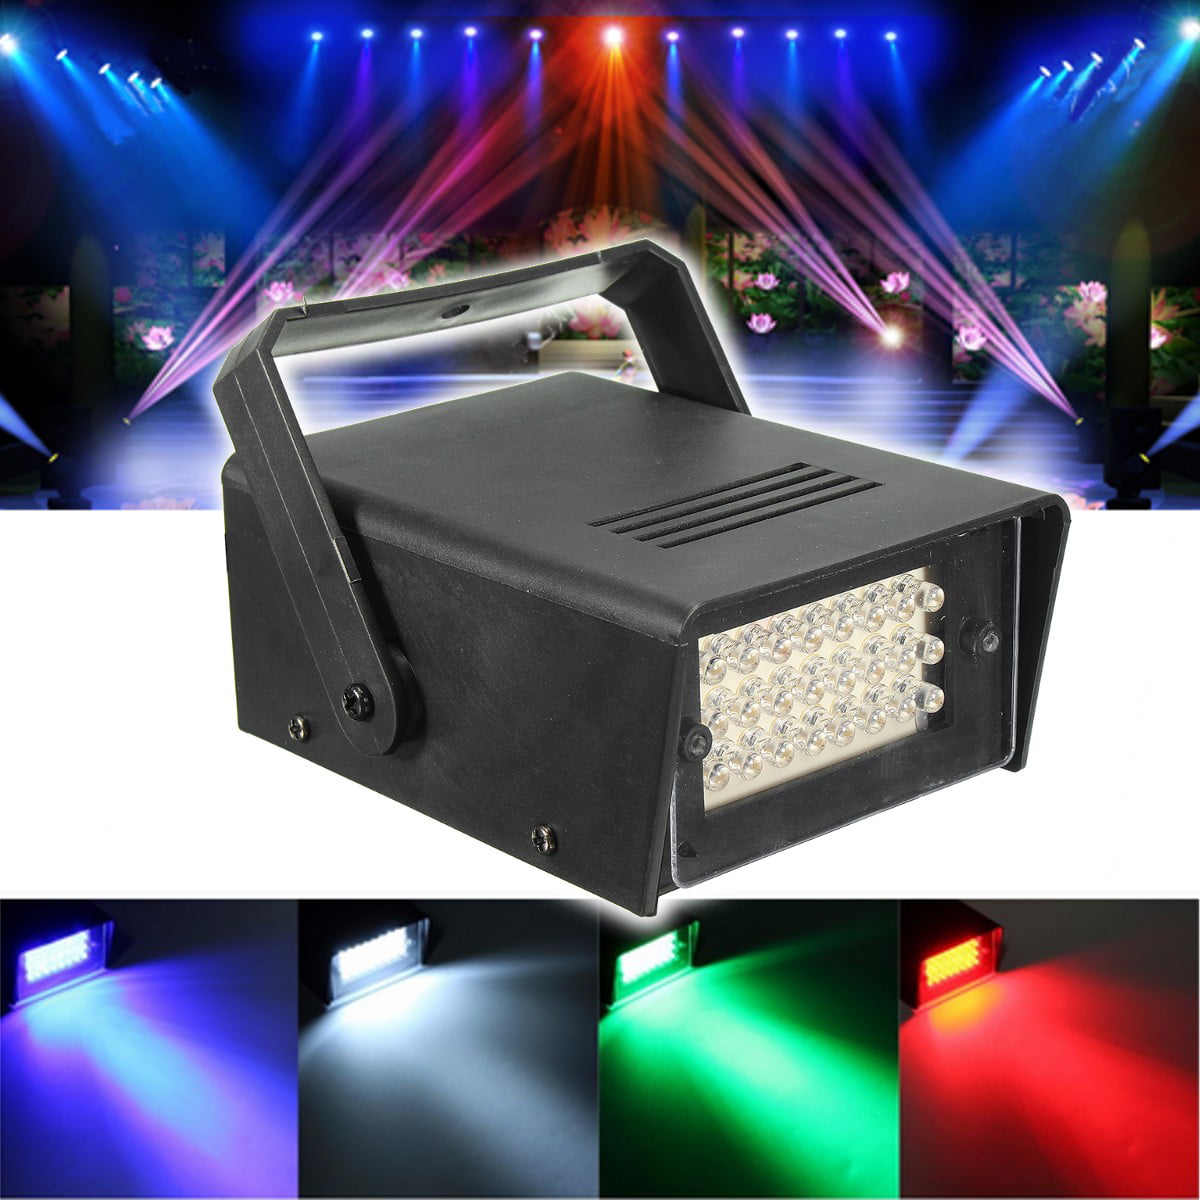 Sound Activated and Flash Speed Control Party Light with 36 Super Bright Leds Stage Lighting for Room Dance Parties Birthday DJ Bar Karaoke Xmas Wedding Show Mini Halloween White LED Strobe Light 